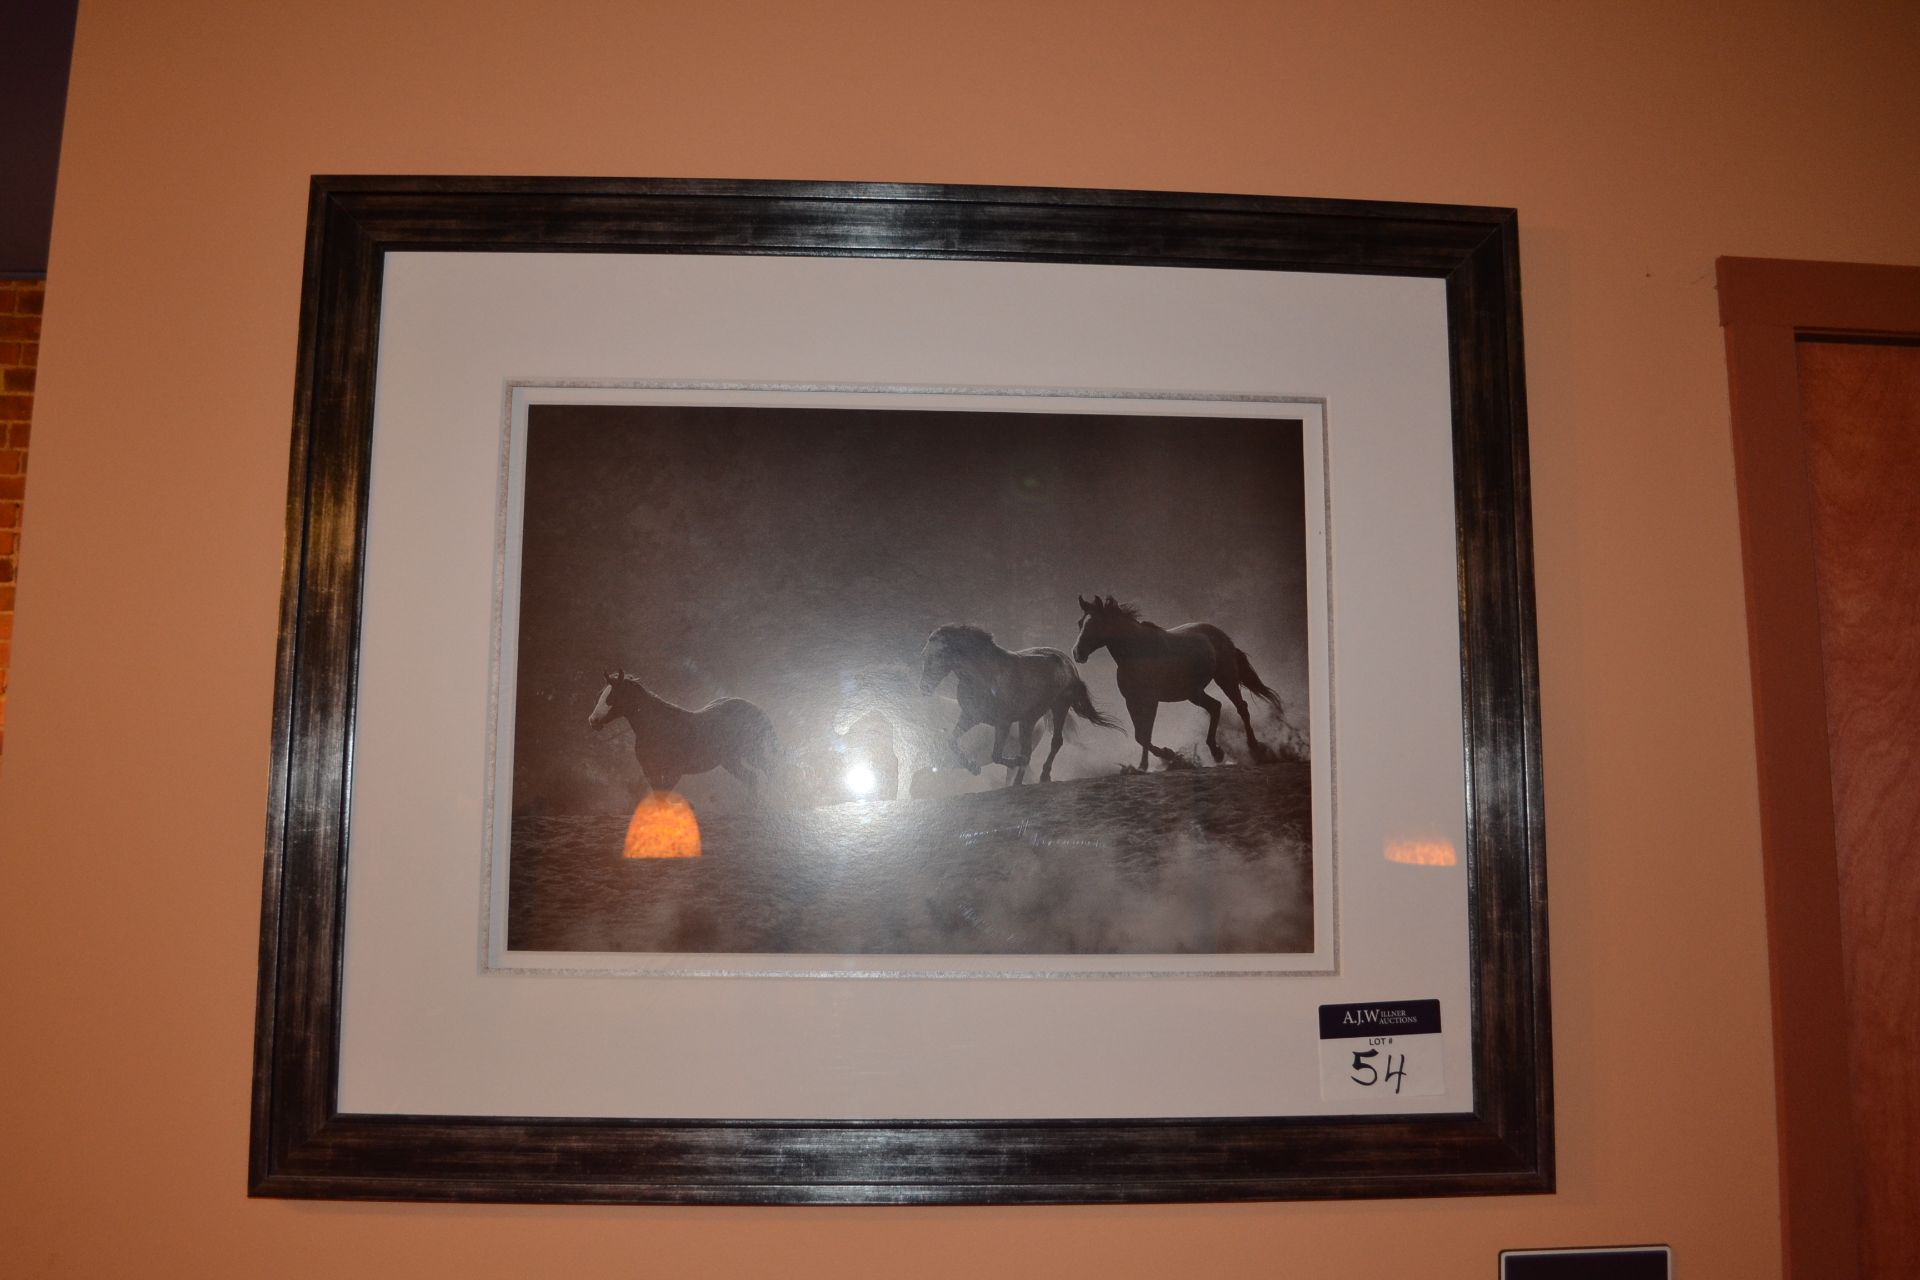 40-1/2" x 32-1/2" Picture Frame w/ Print of Horses - Image 2 of 2